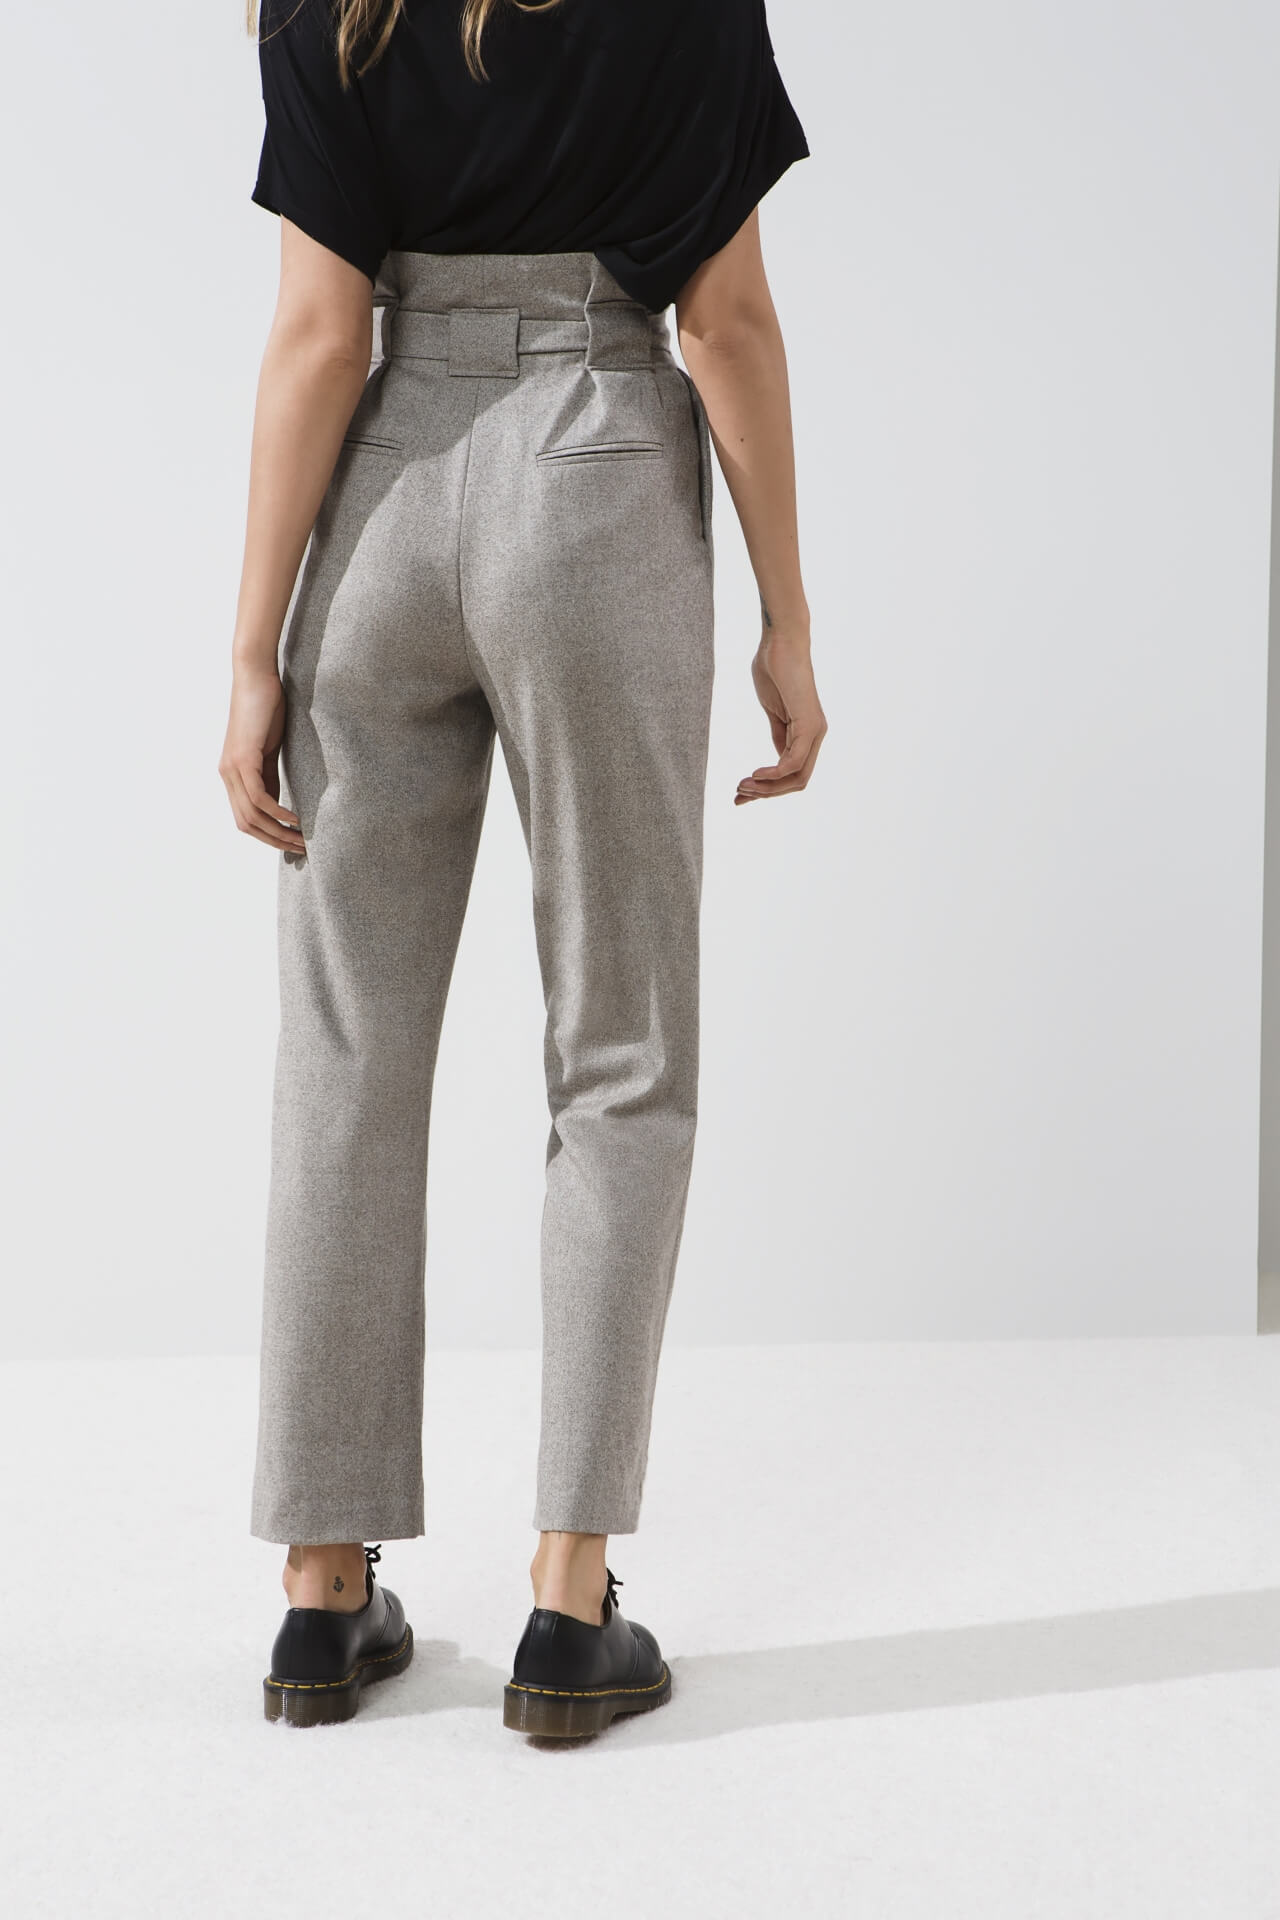 MARGAUX LONNBERG Oswald Pants | FAUBOURG